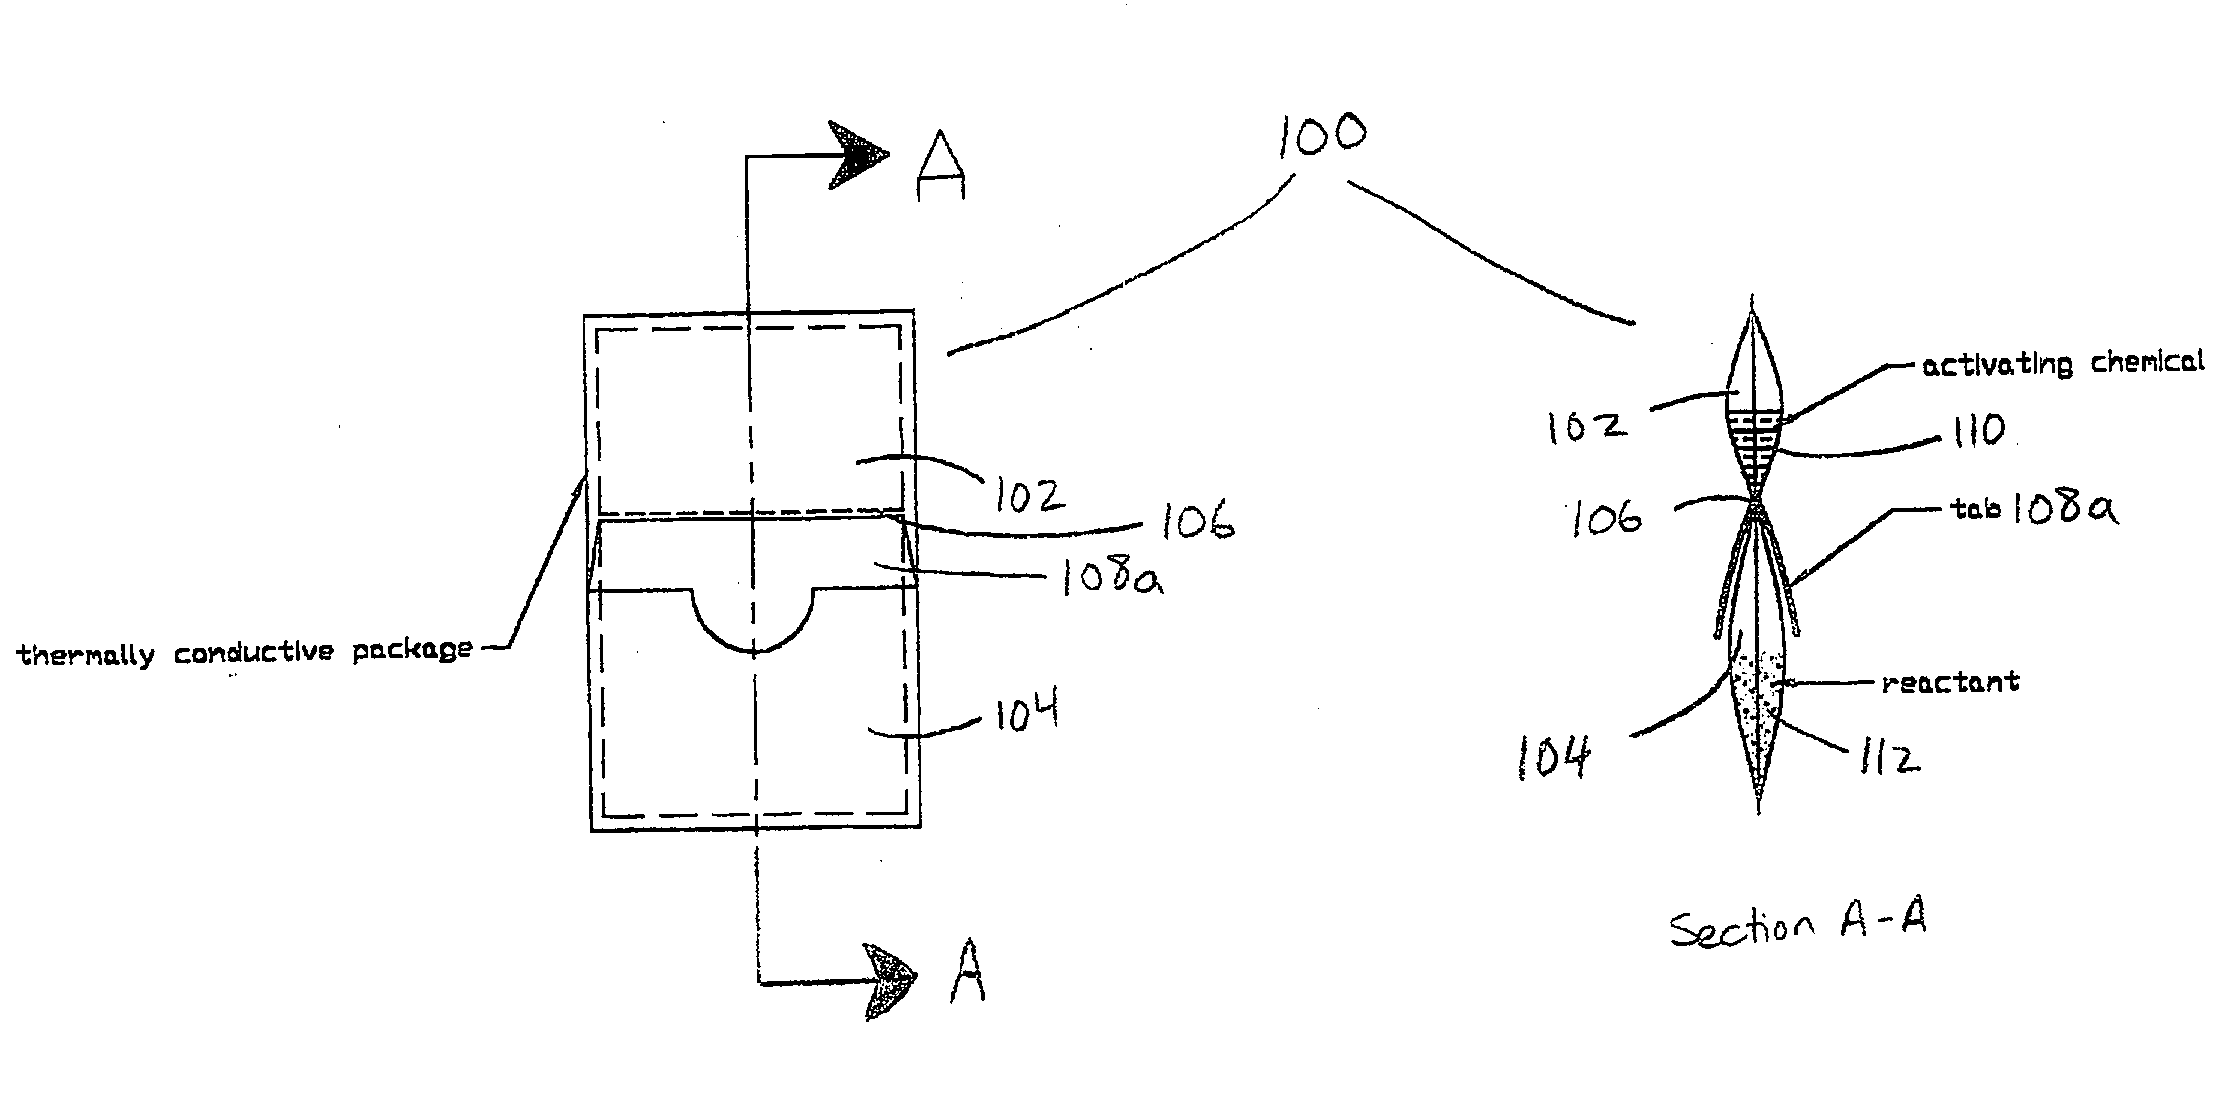 Trigger mechanism for self-heating/cooling packages or containers universally applied to both rigid and non-rigid packages and containers